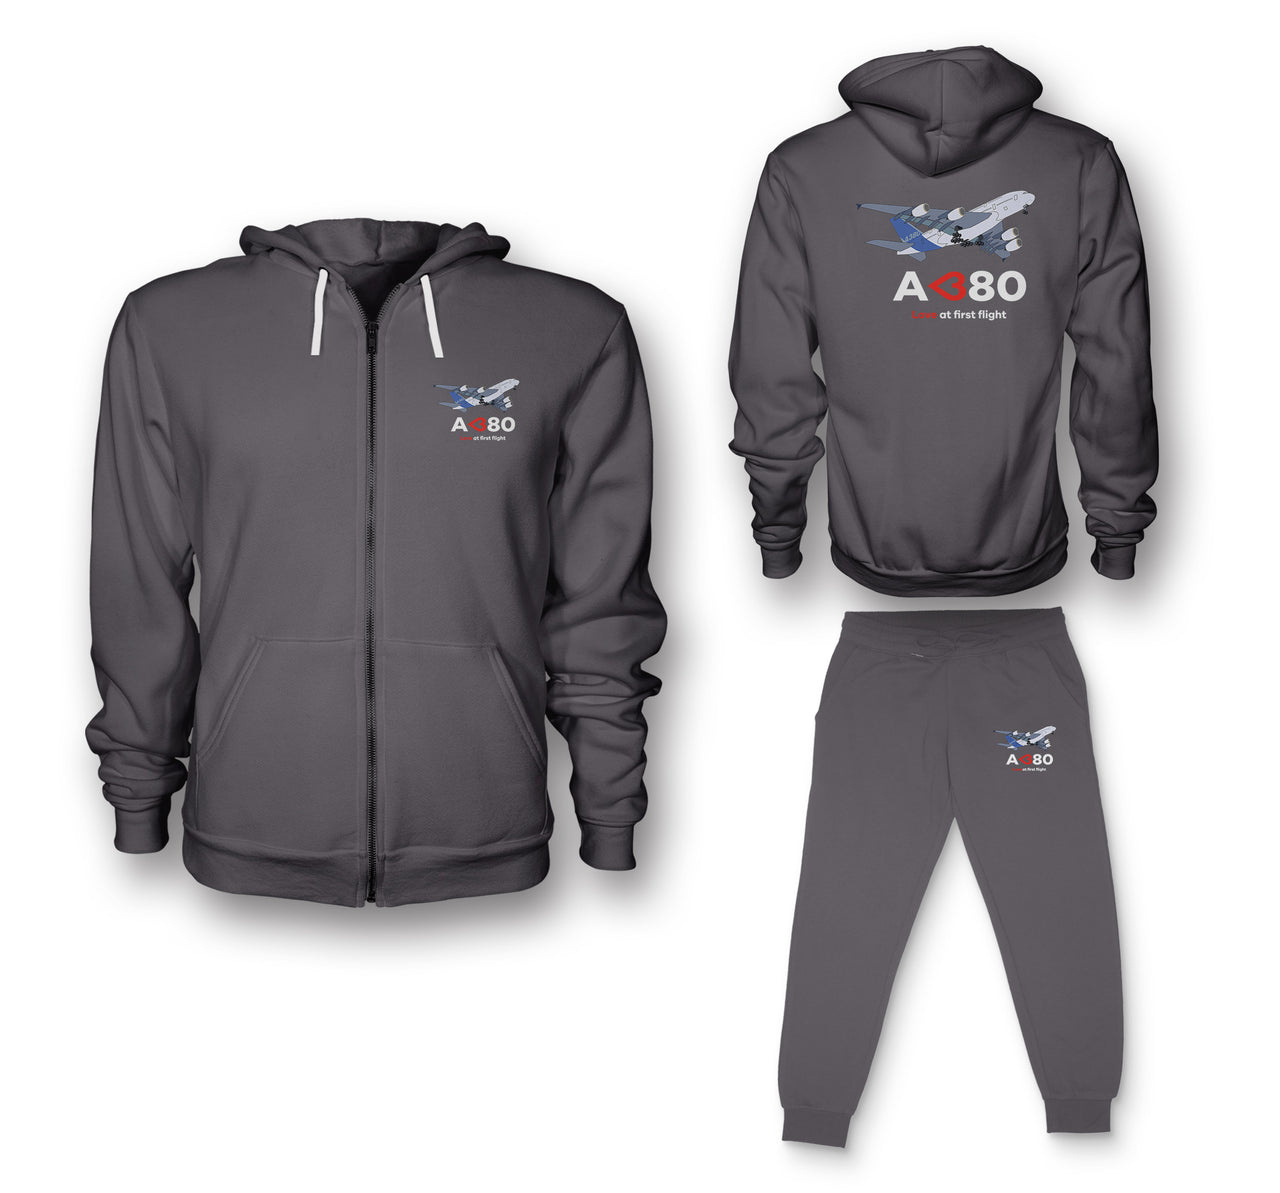 Airbus A380 Love at first flight Designed Zipped Hoodies & Sweatpants Set